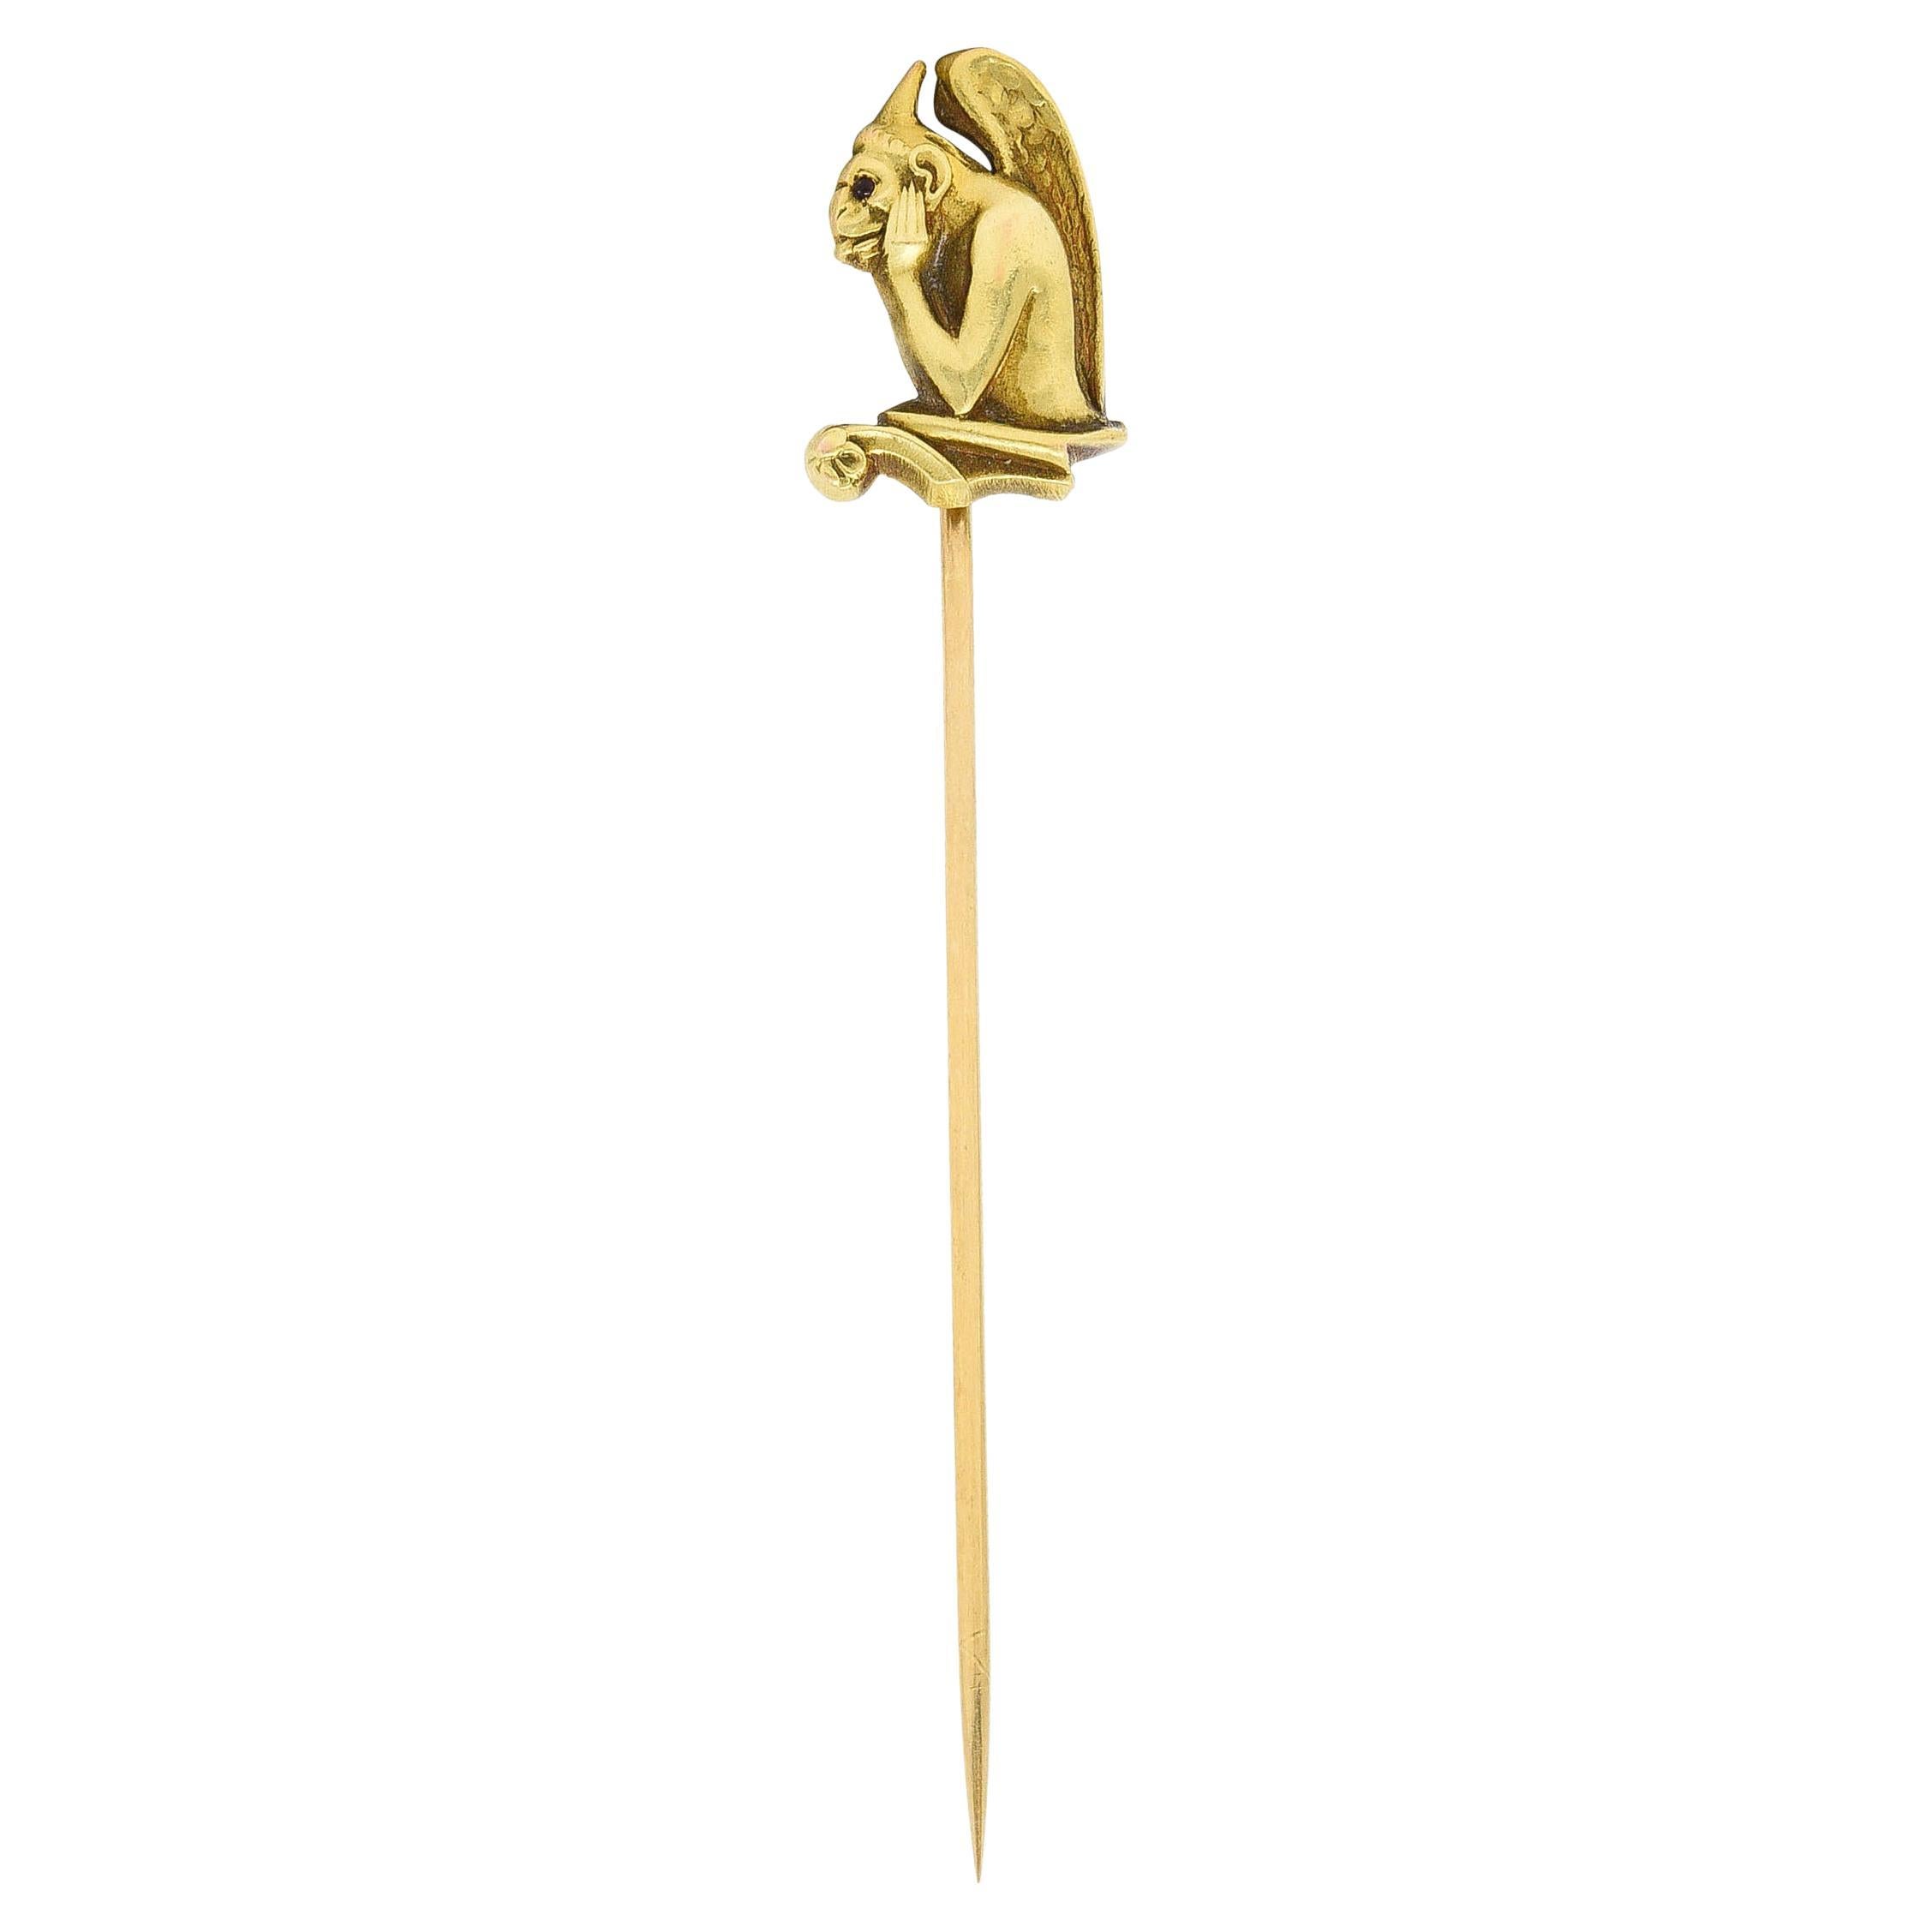 Stickpin designed as the profile of a winged gargoyle resting head in hands 

With textured wings, hair, and stylized features

Accented by round cabochon garnet eye

Stamped 14k for 14 karat gold

Maker's mark for Carter Gough & Co.

Circa: